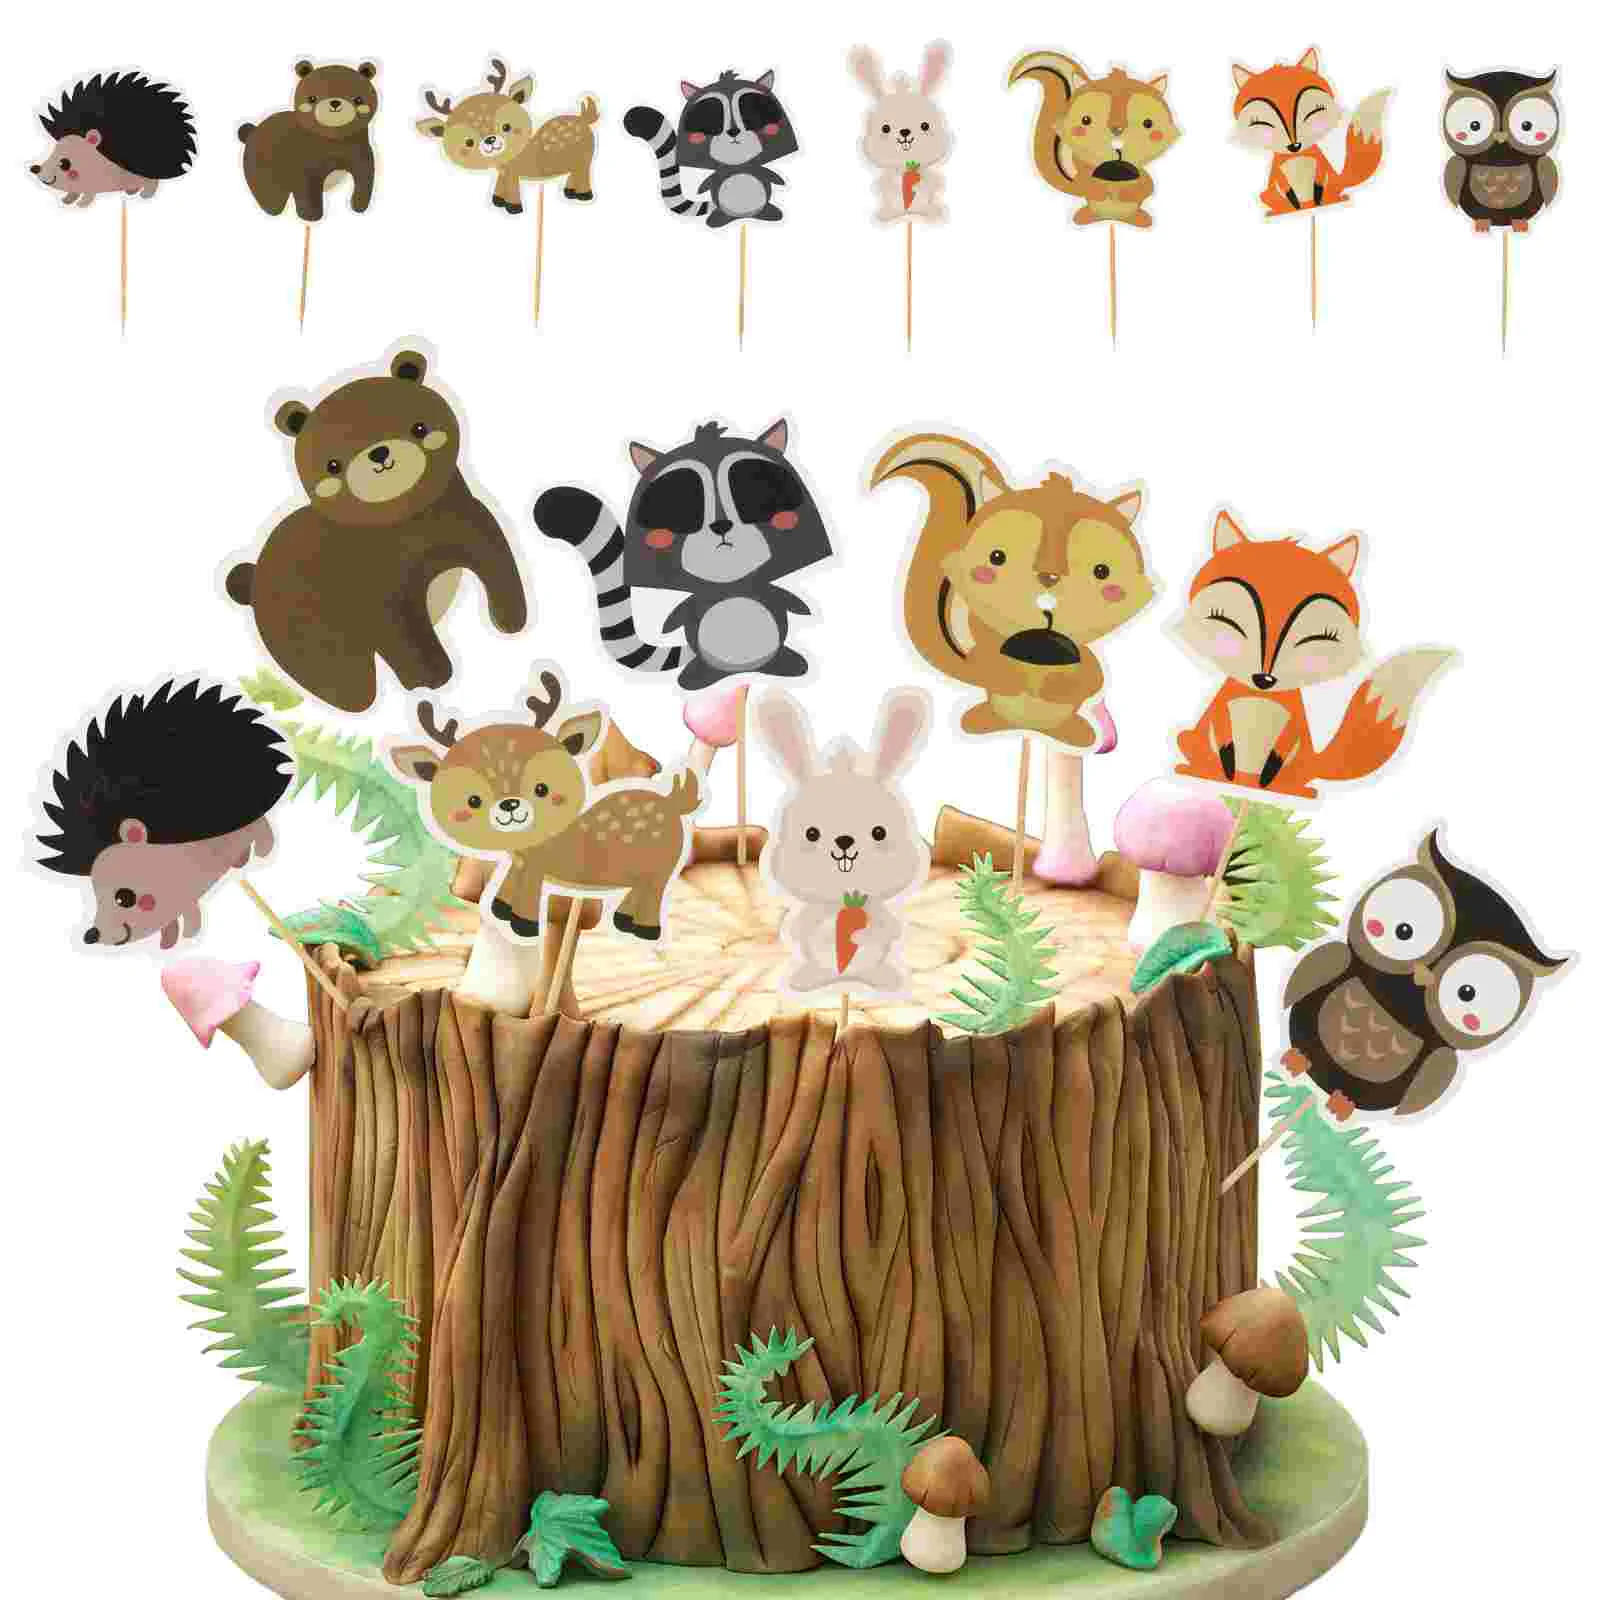 

Jungle Cake Cupcake Toppers Topper Animal Decorations Theme Forest Owl Hedgehog Squirrel